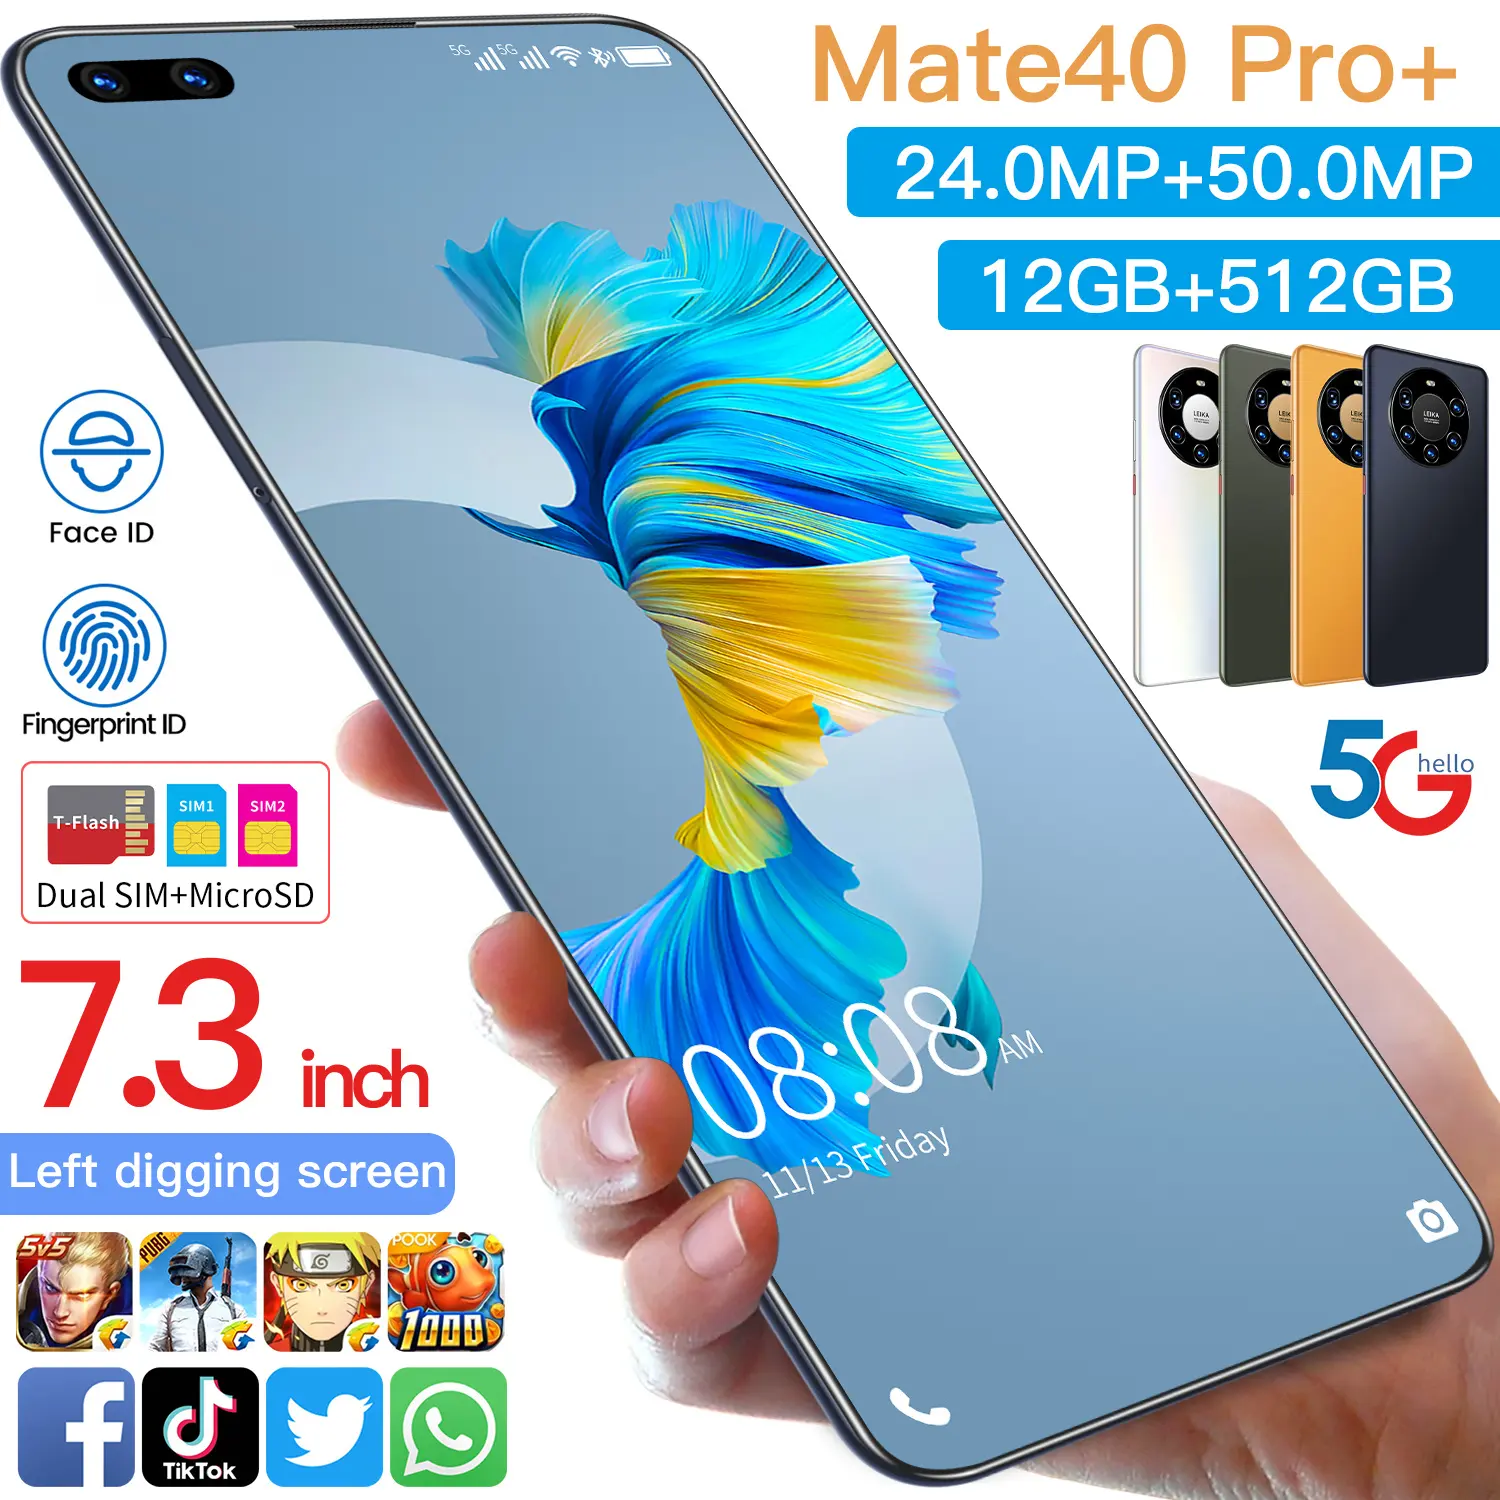 Hot Selling Mate 40 Pro+ Original 12gb+512gb 24mp+50mp Face Unlock Full Display Android 10.0 Cell Phone Smart Mobile Phone